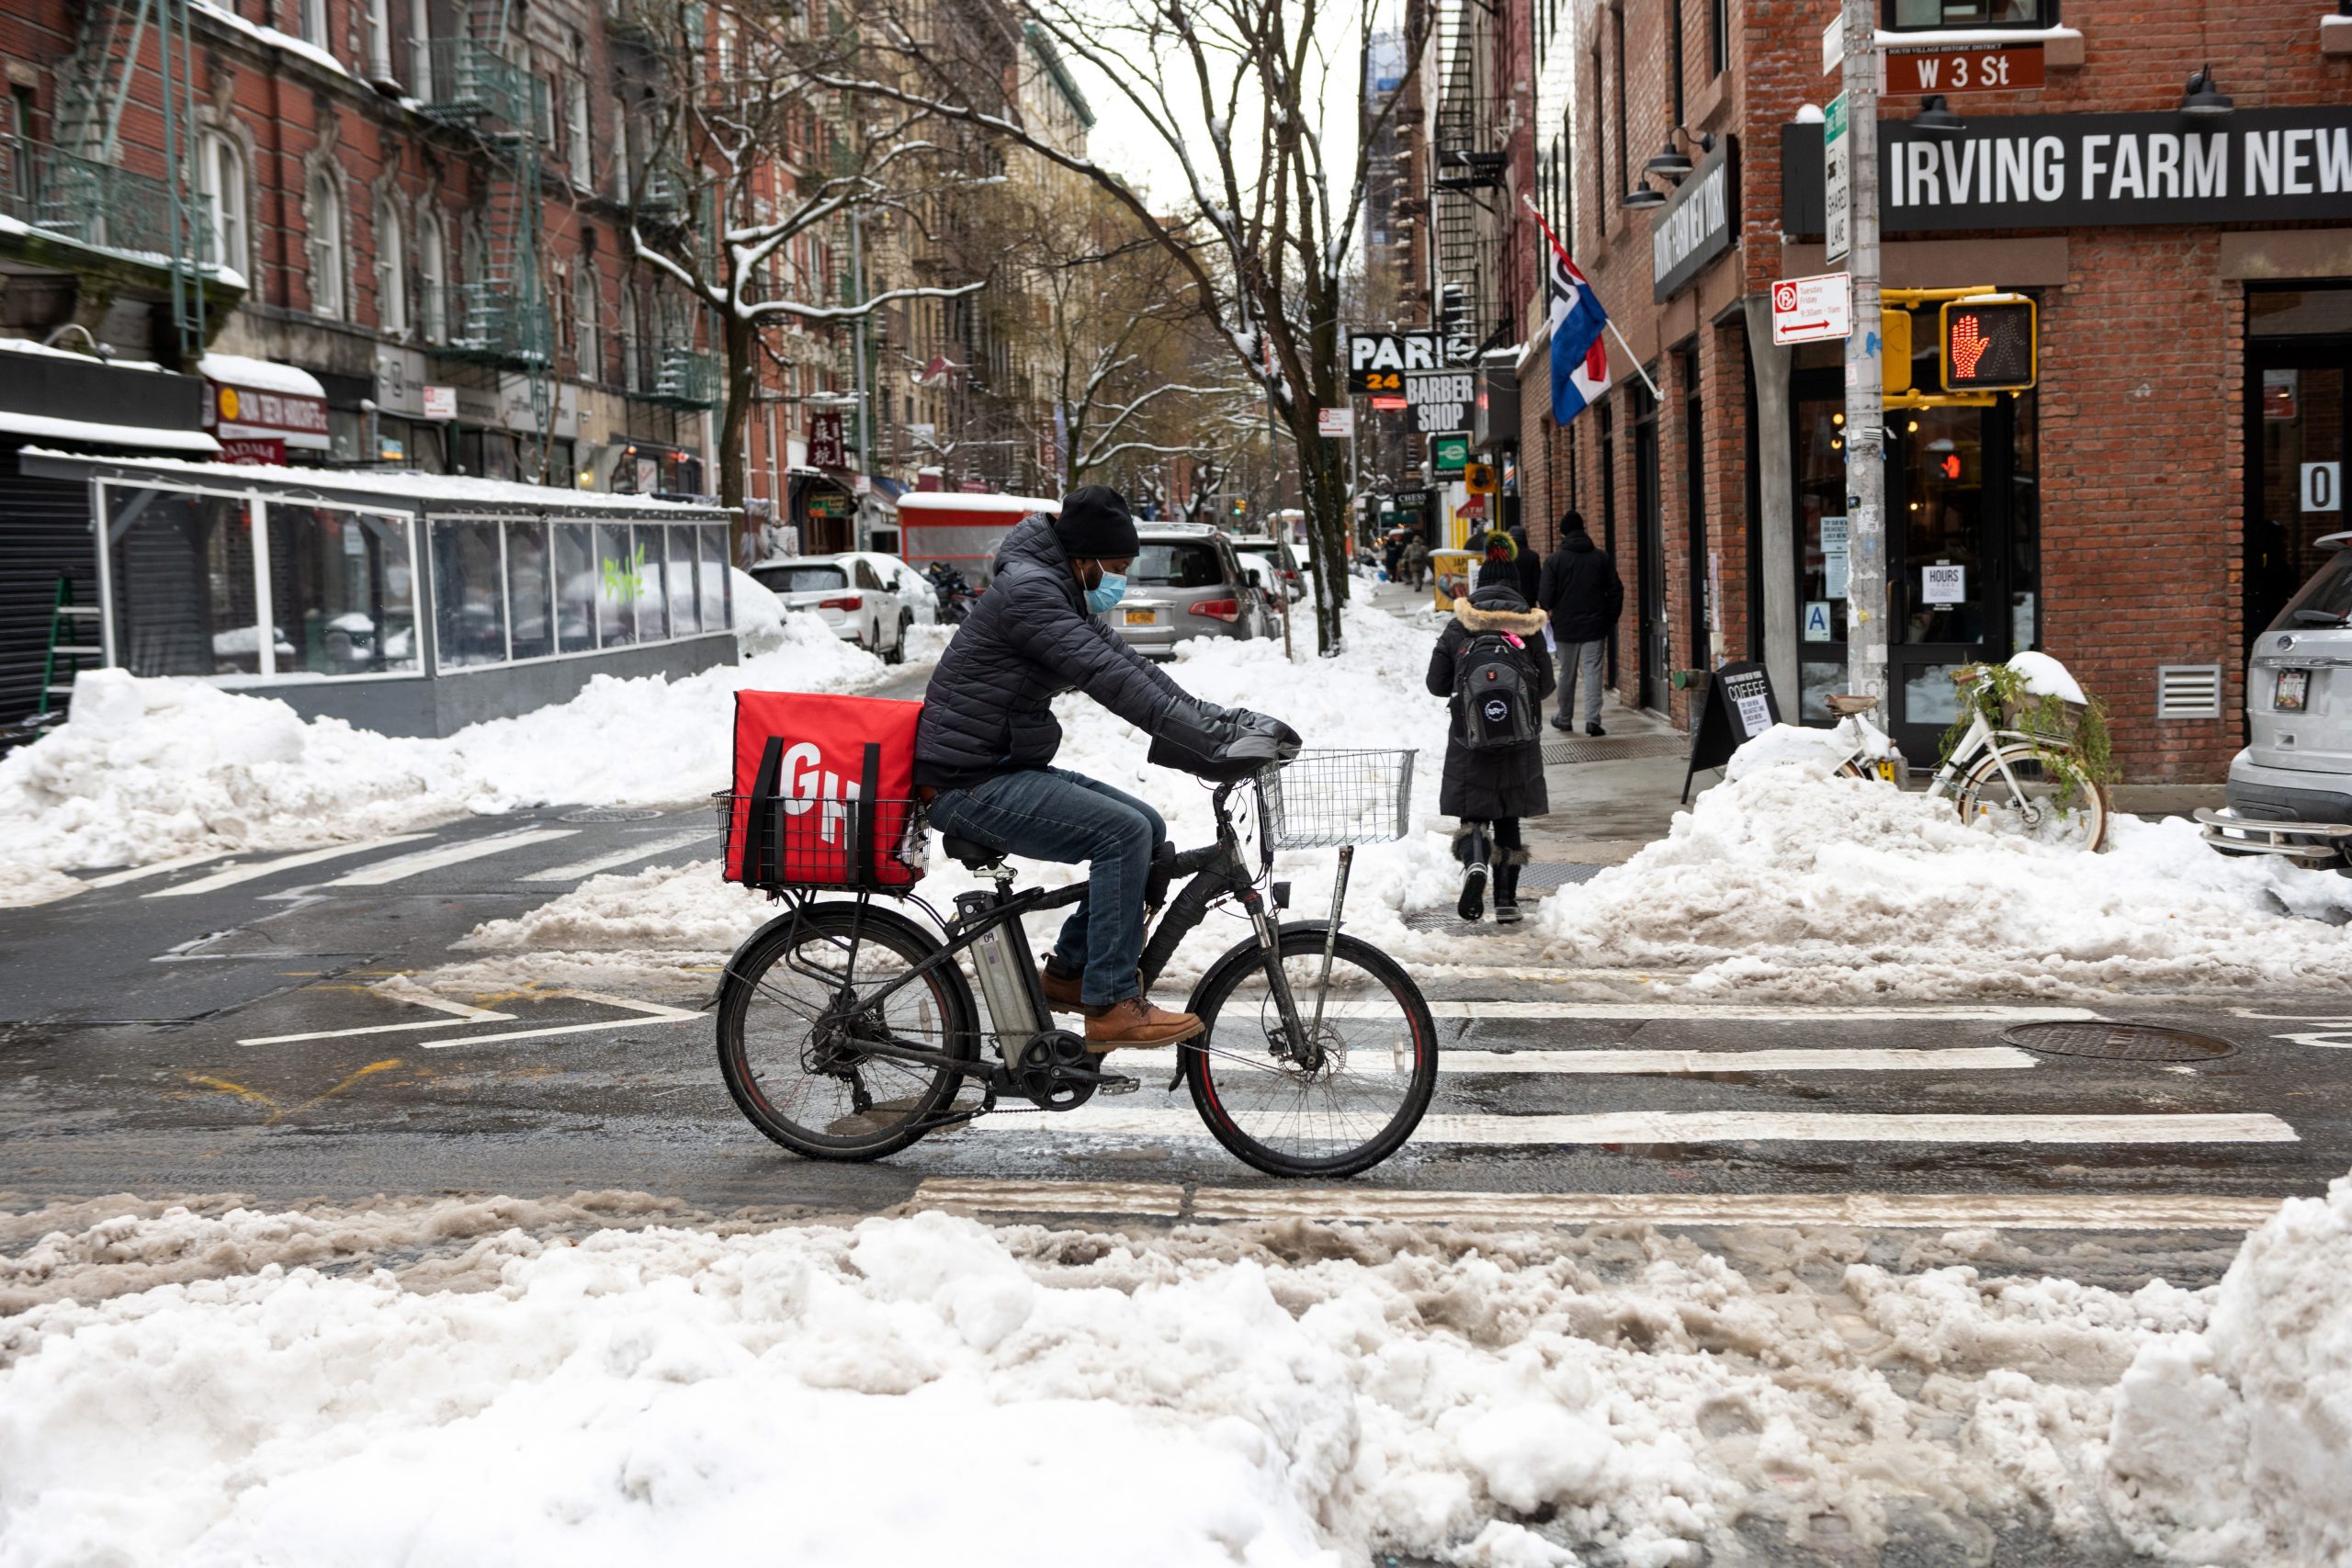 A Grubhub delivery driver rides along partially cleared streets near piles of snow in Greenwich Village on February 03, 2021 in New York City. New York City and much of the Northeast was hit by a major winter storm